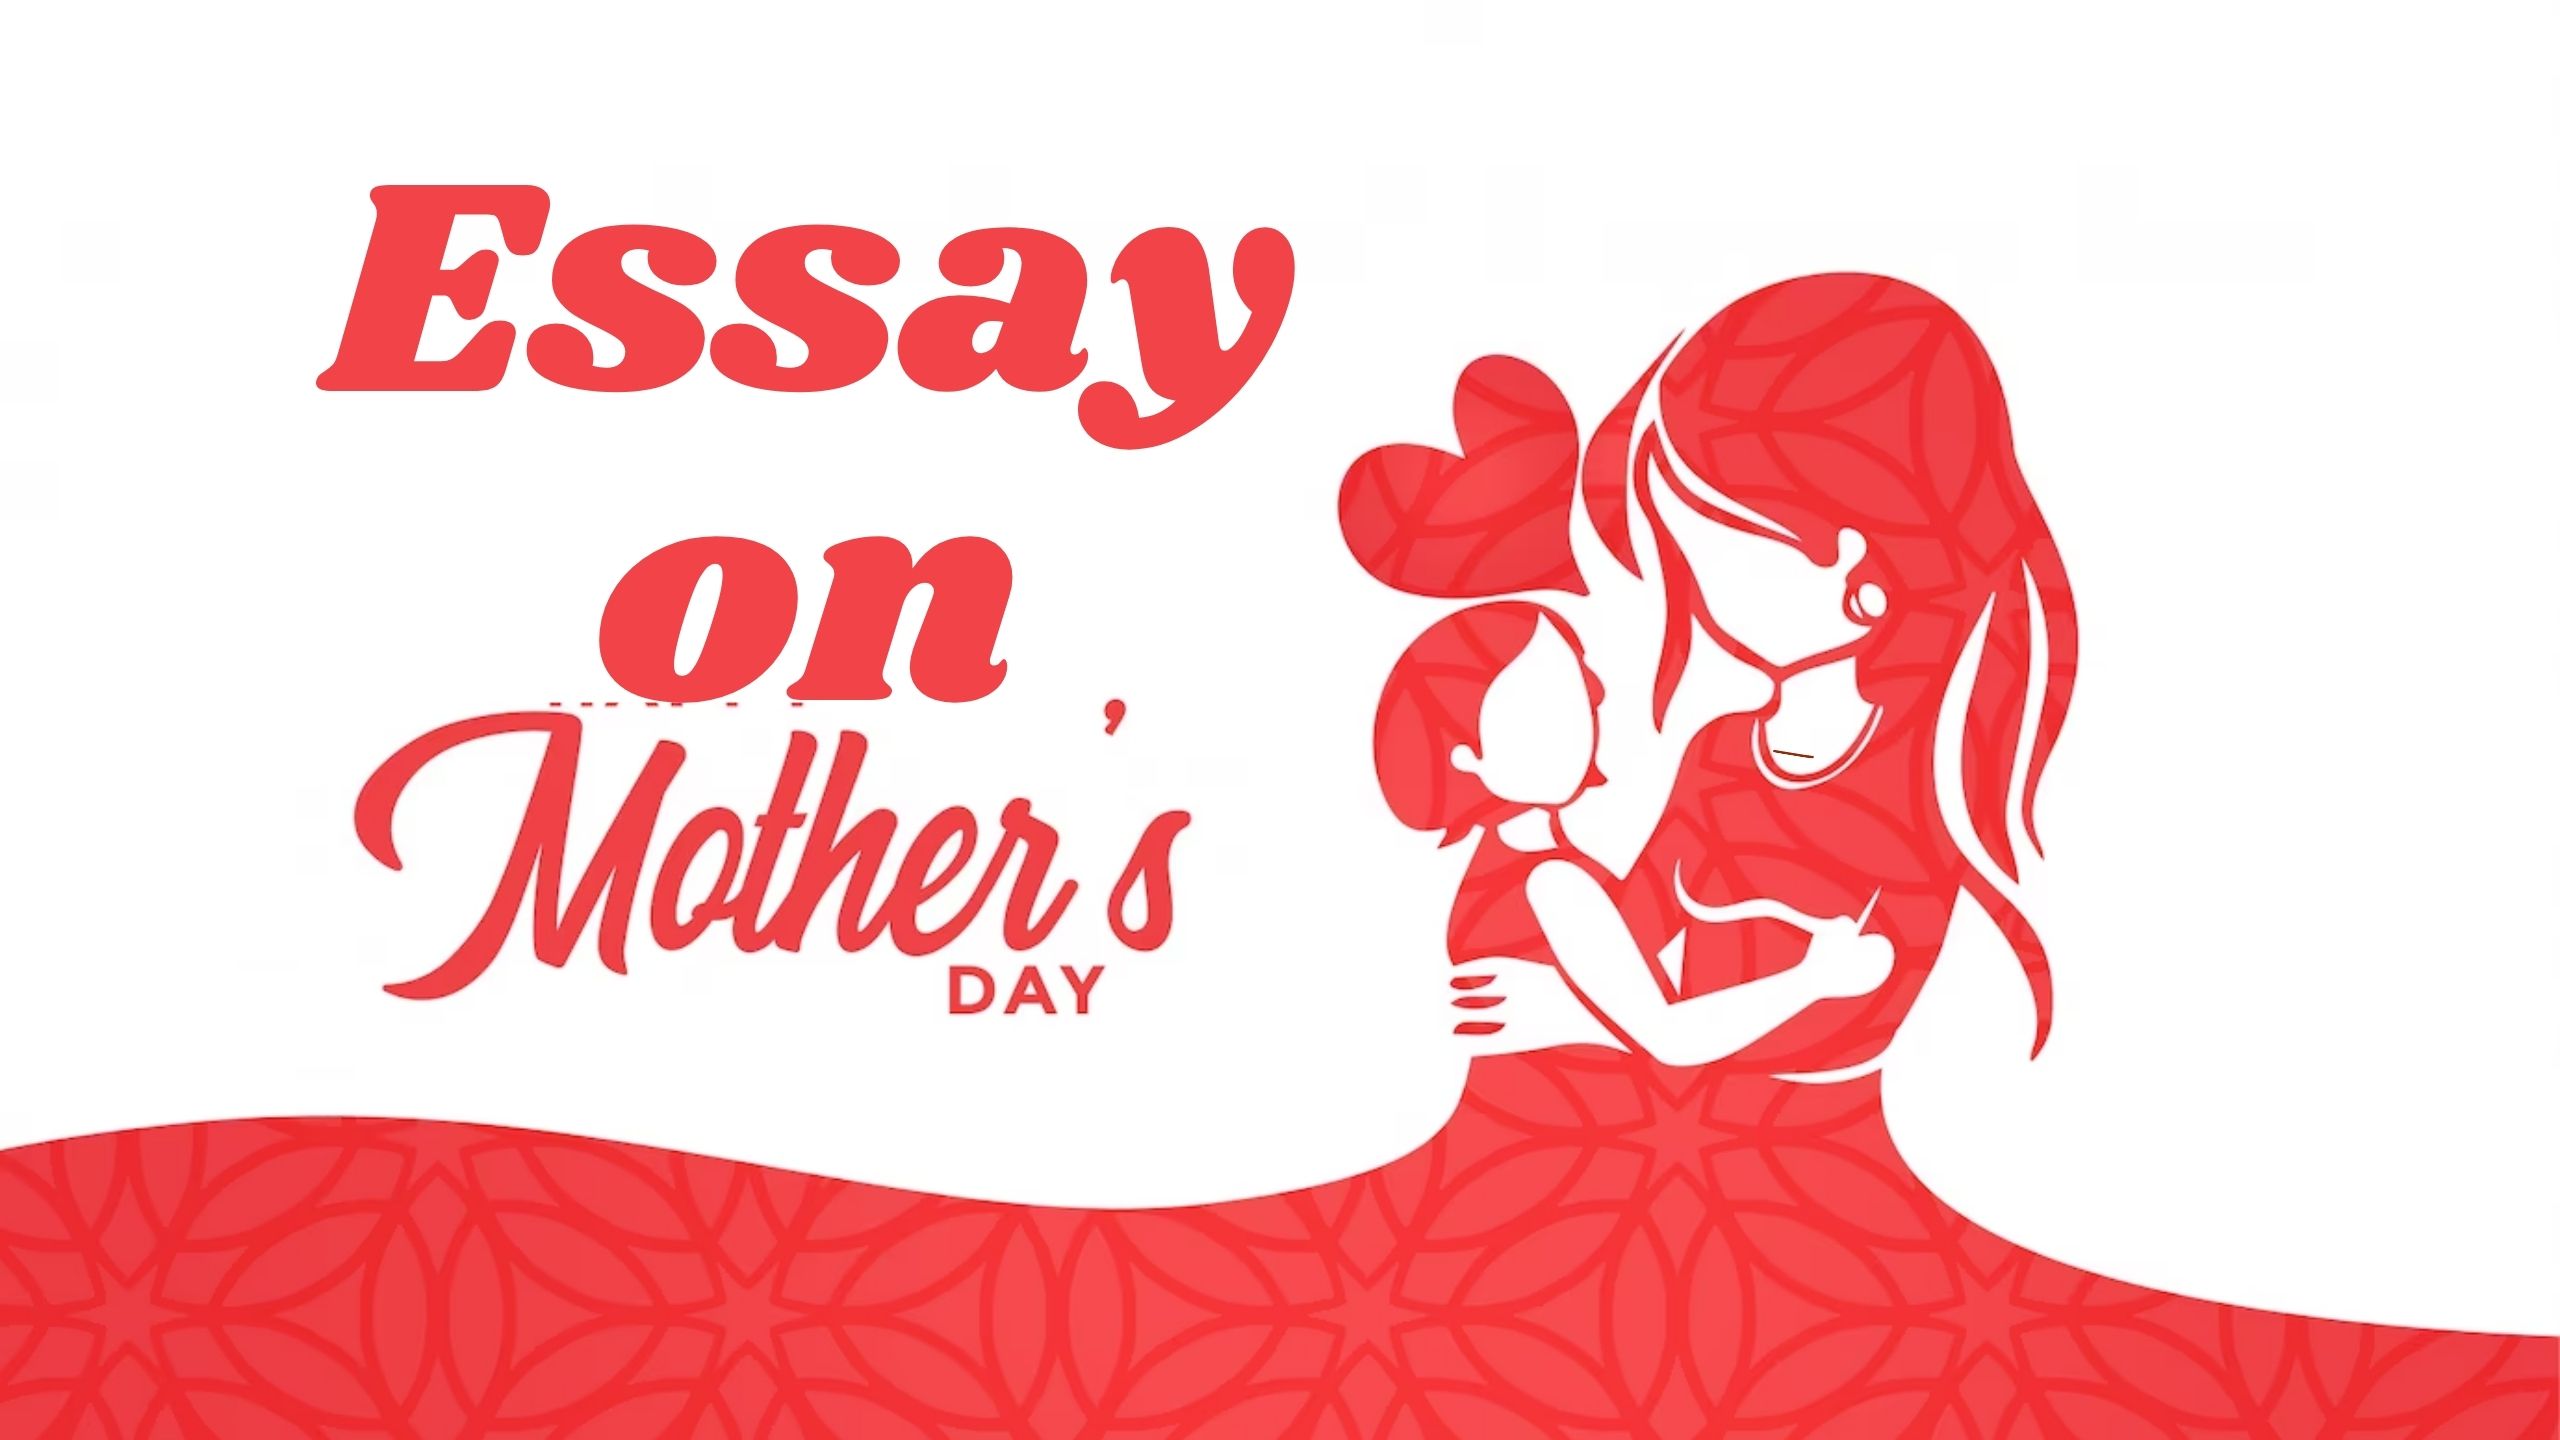 Essay on mothers dAY